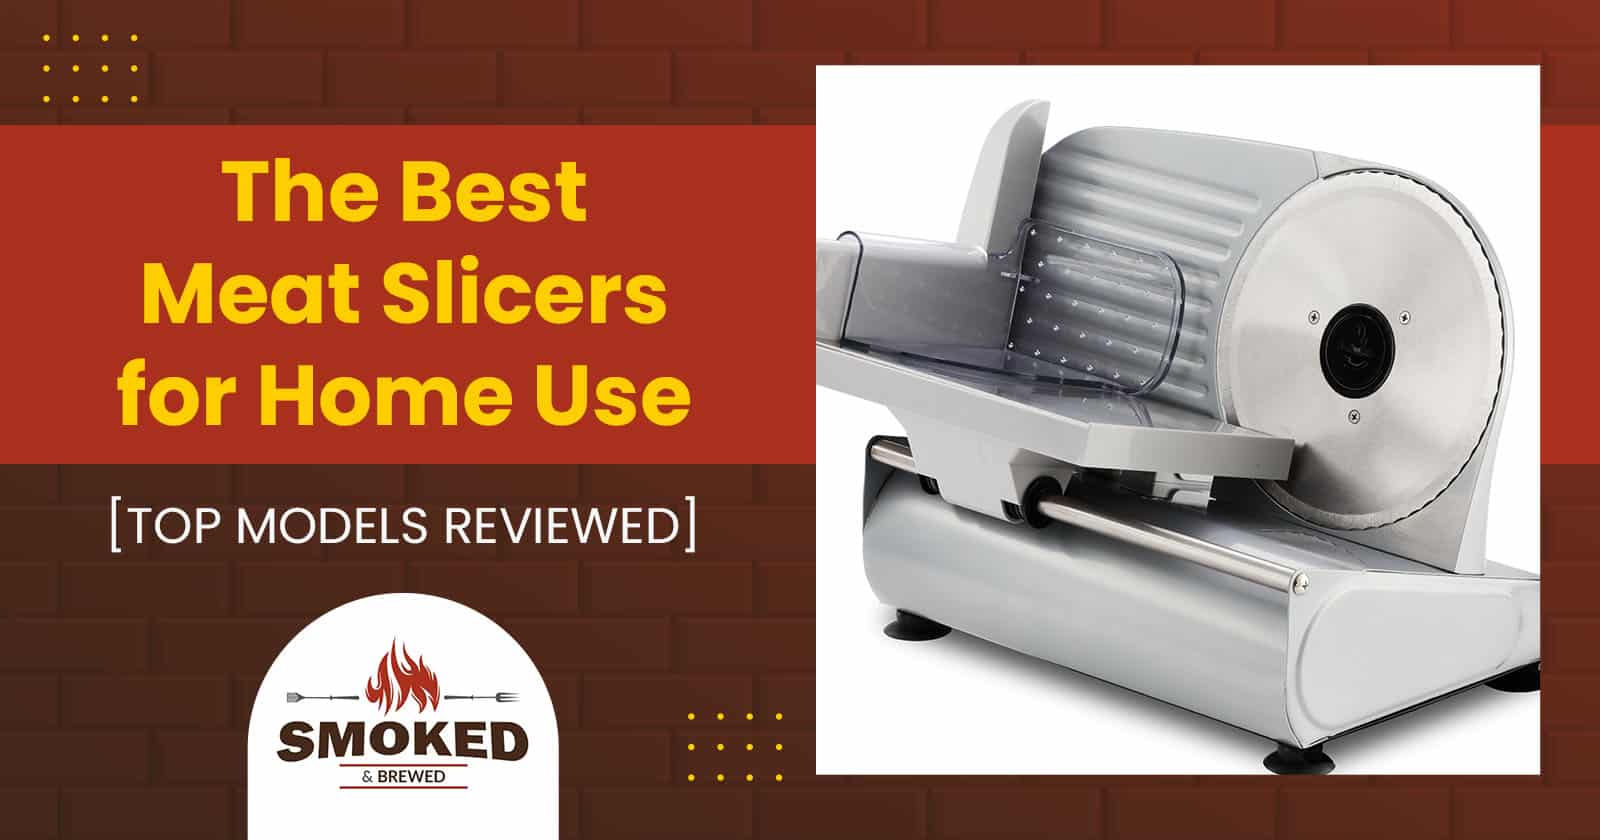 The Best Meat Slicers for Home Use [TOP MODELS REVIEWED]